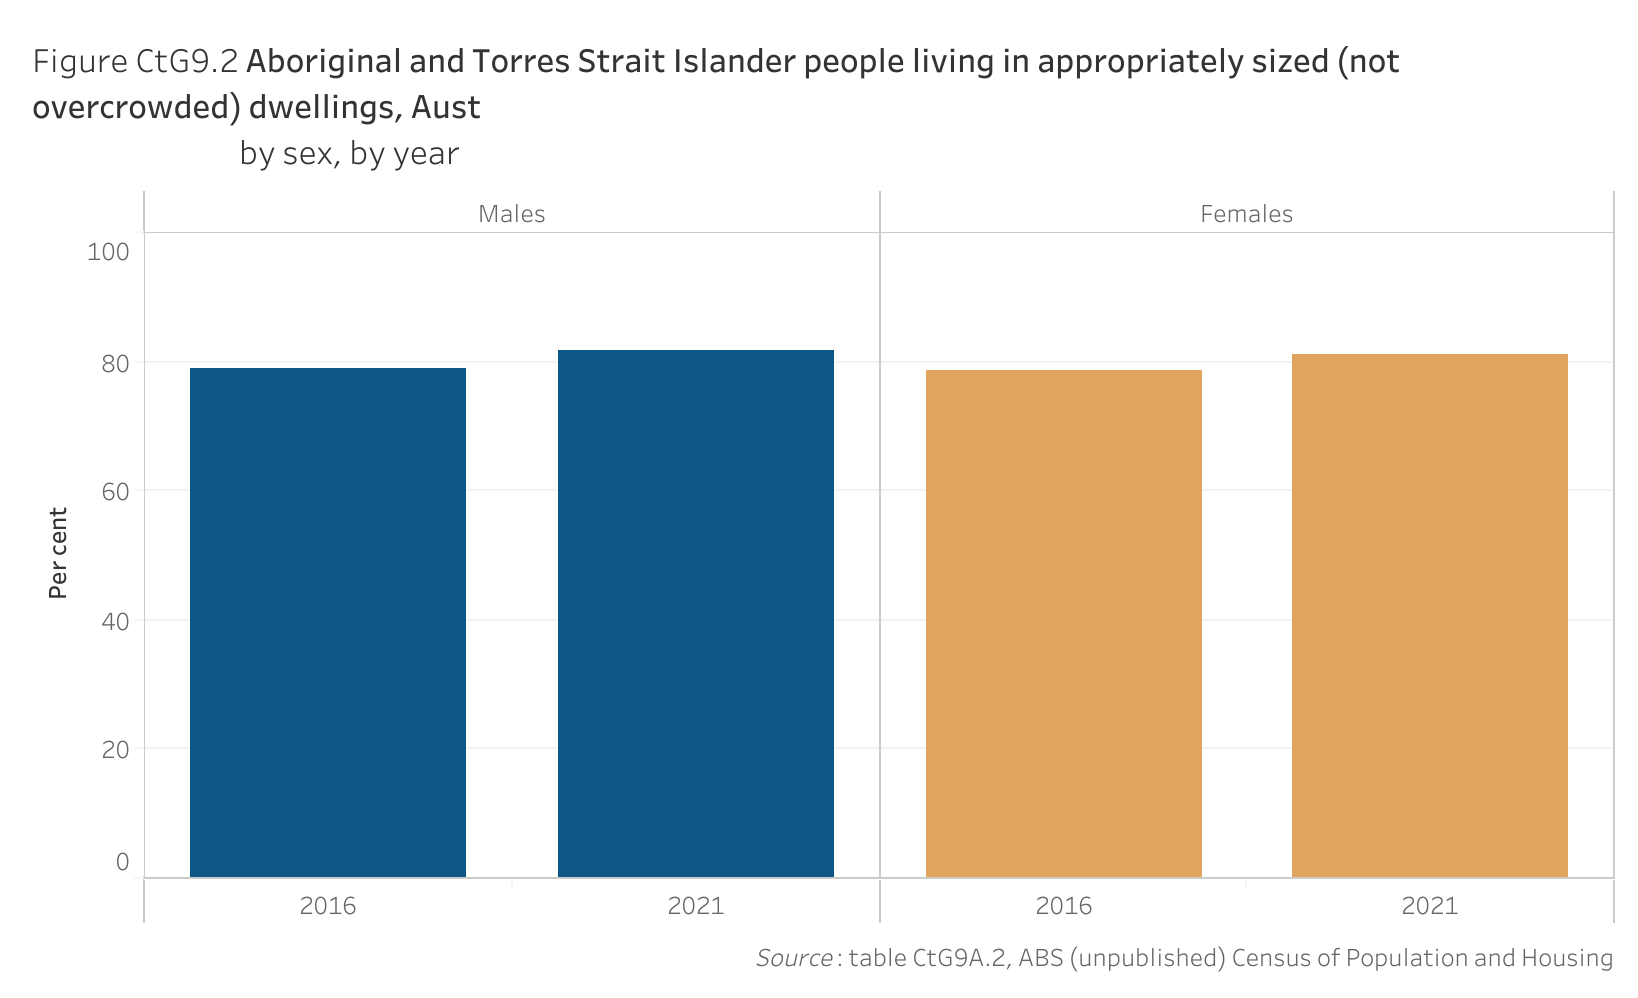 Figure CtG9.2 shows Aboriginal and Torres Strait Islander people living in appropriately sized (not overcrowded) dwellings, Australia, by sex, by year. More details can be found within the text near this image.